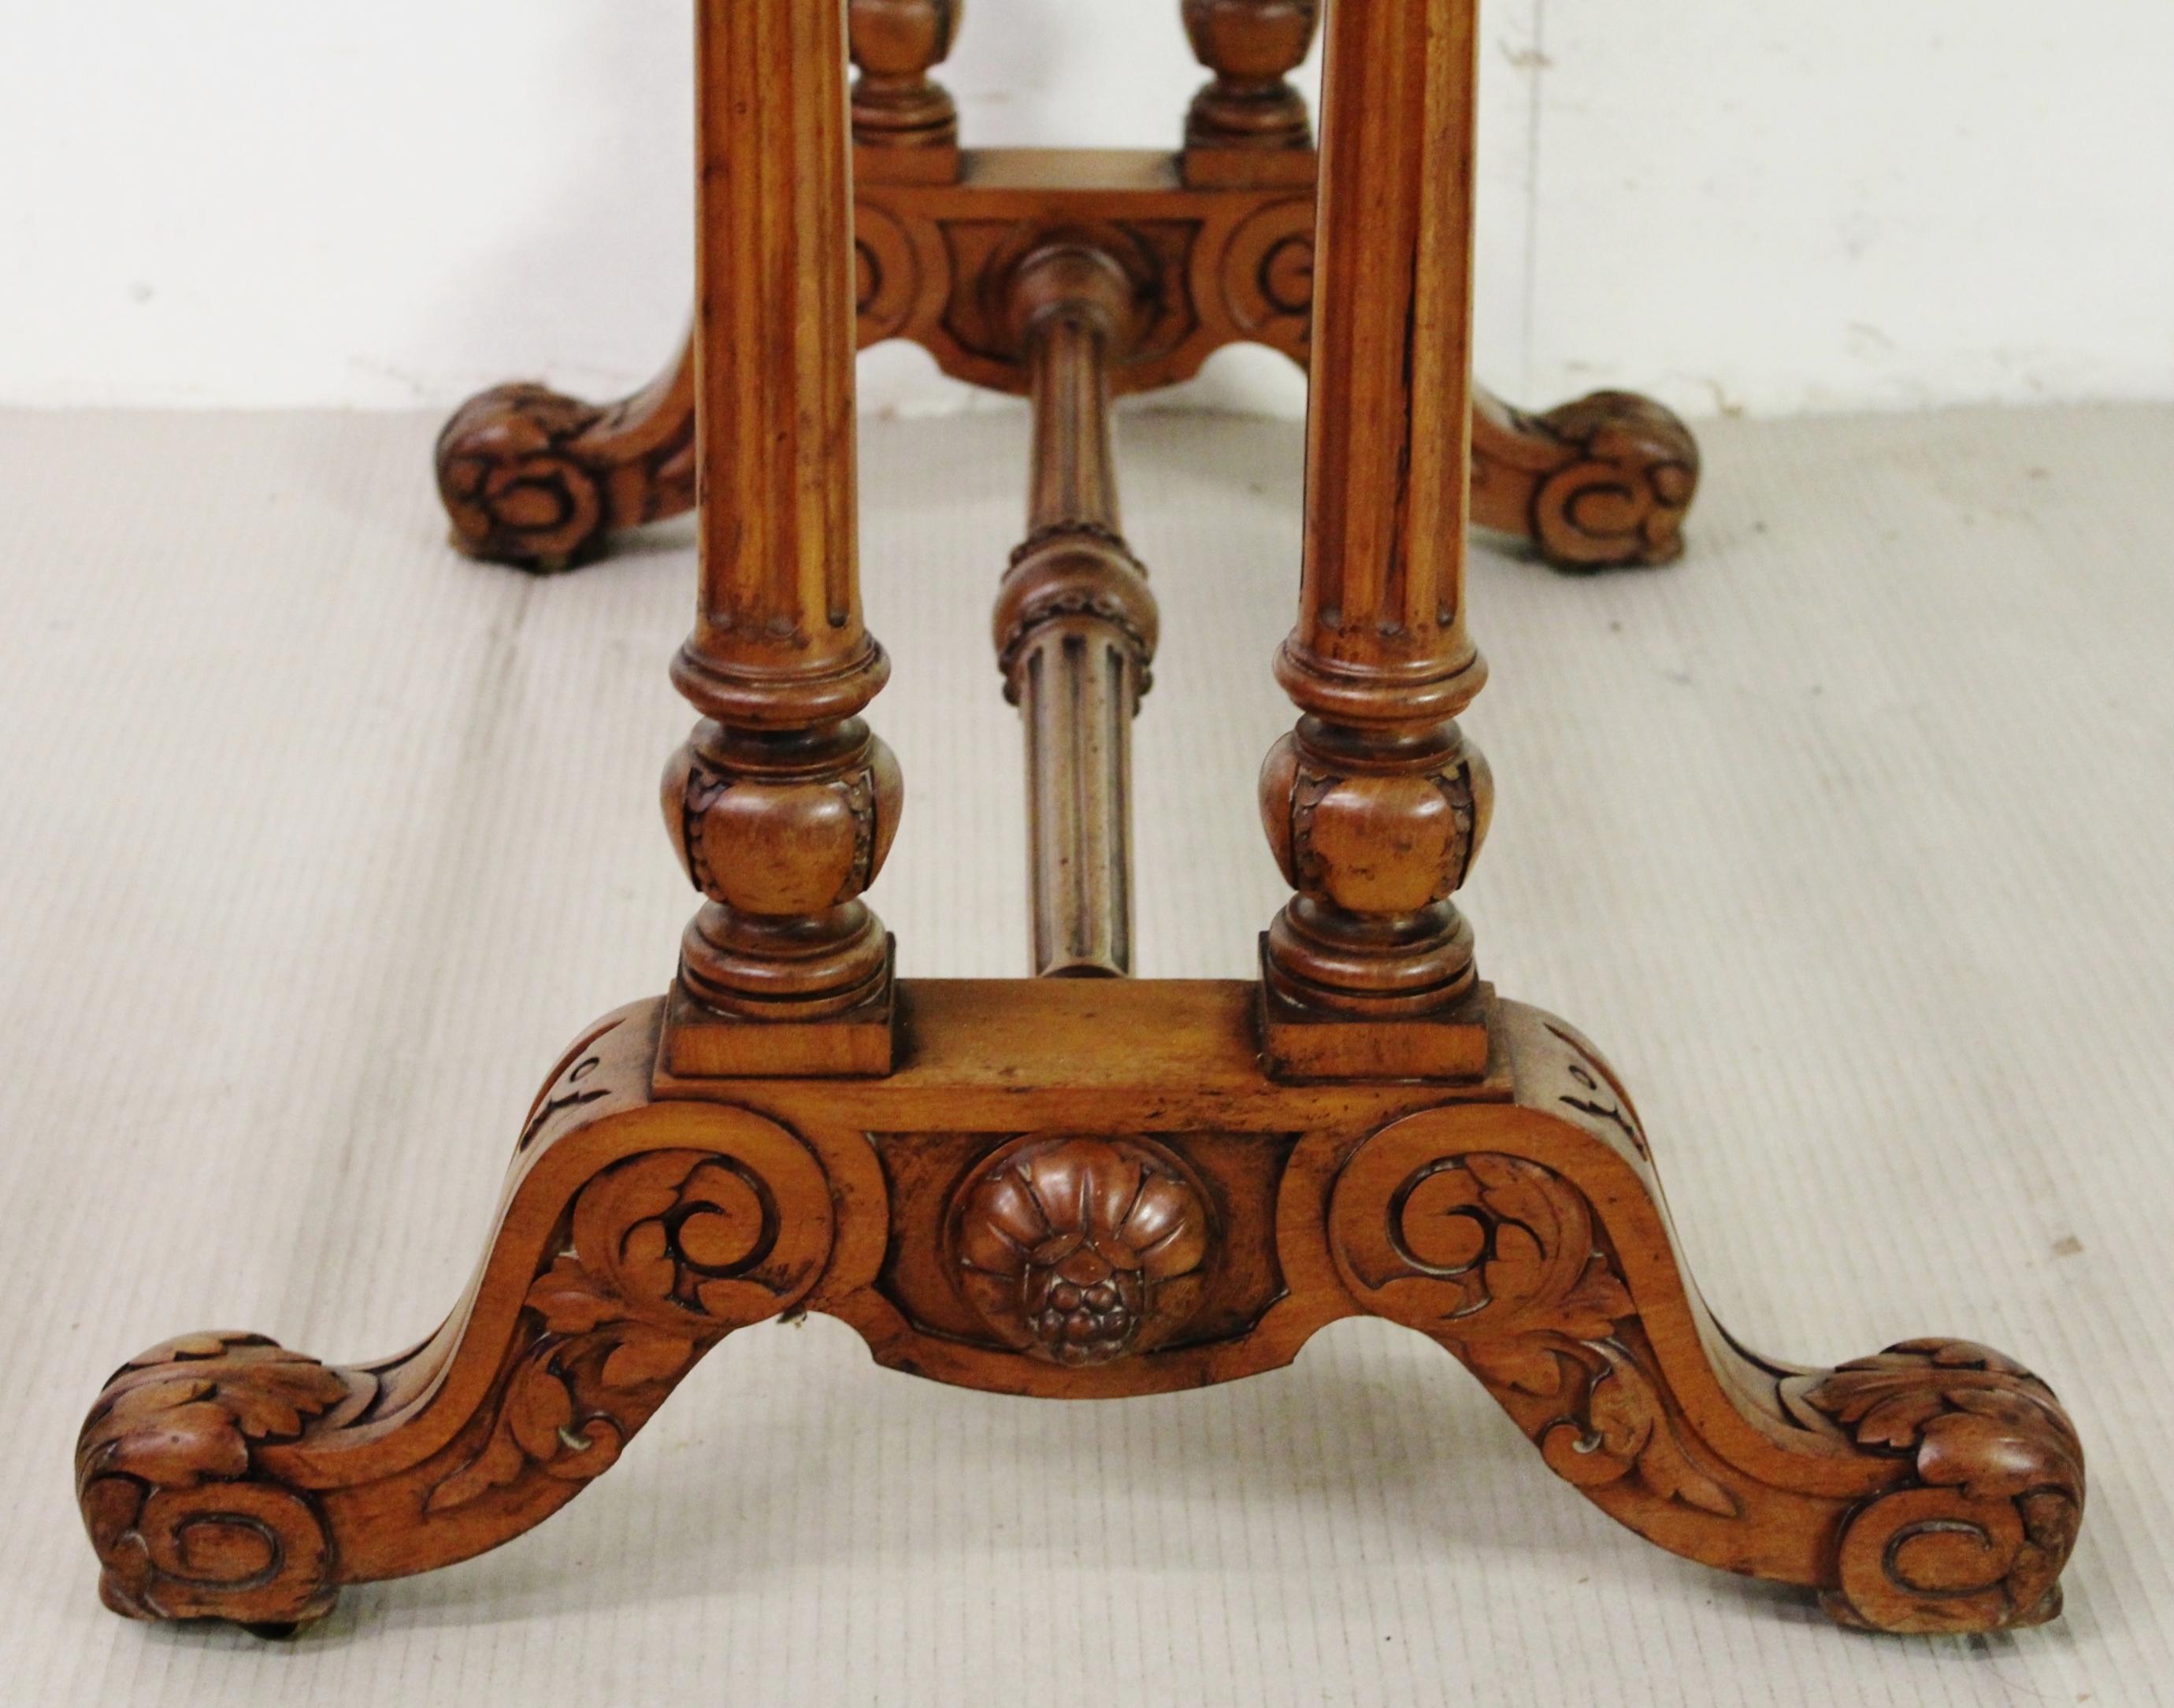 A superb quality mid-Victorian period walnut library stretcher table by C Hindley & Sons , Oxford Street, London. Of fine construction in solid walnut with attractive walnut veneers and cedar wood drawer linings. The shaped top fitted with a